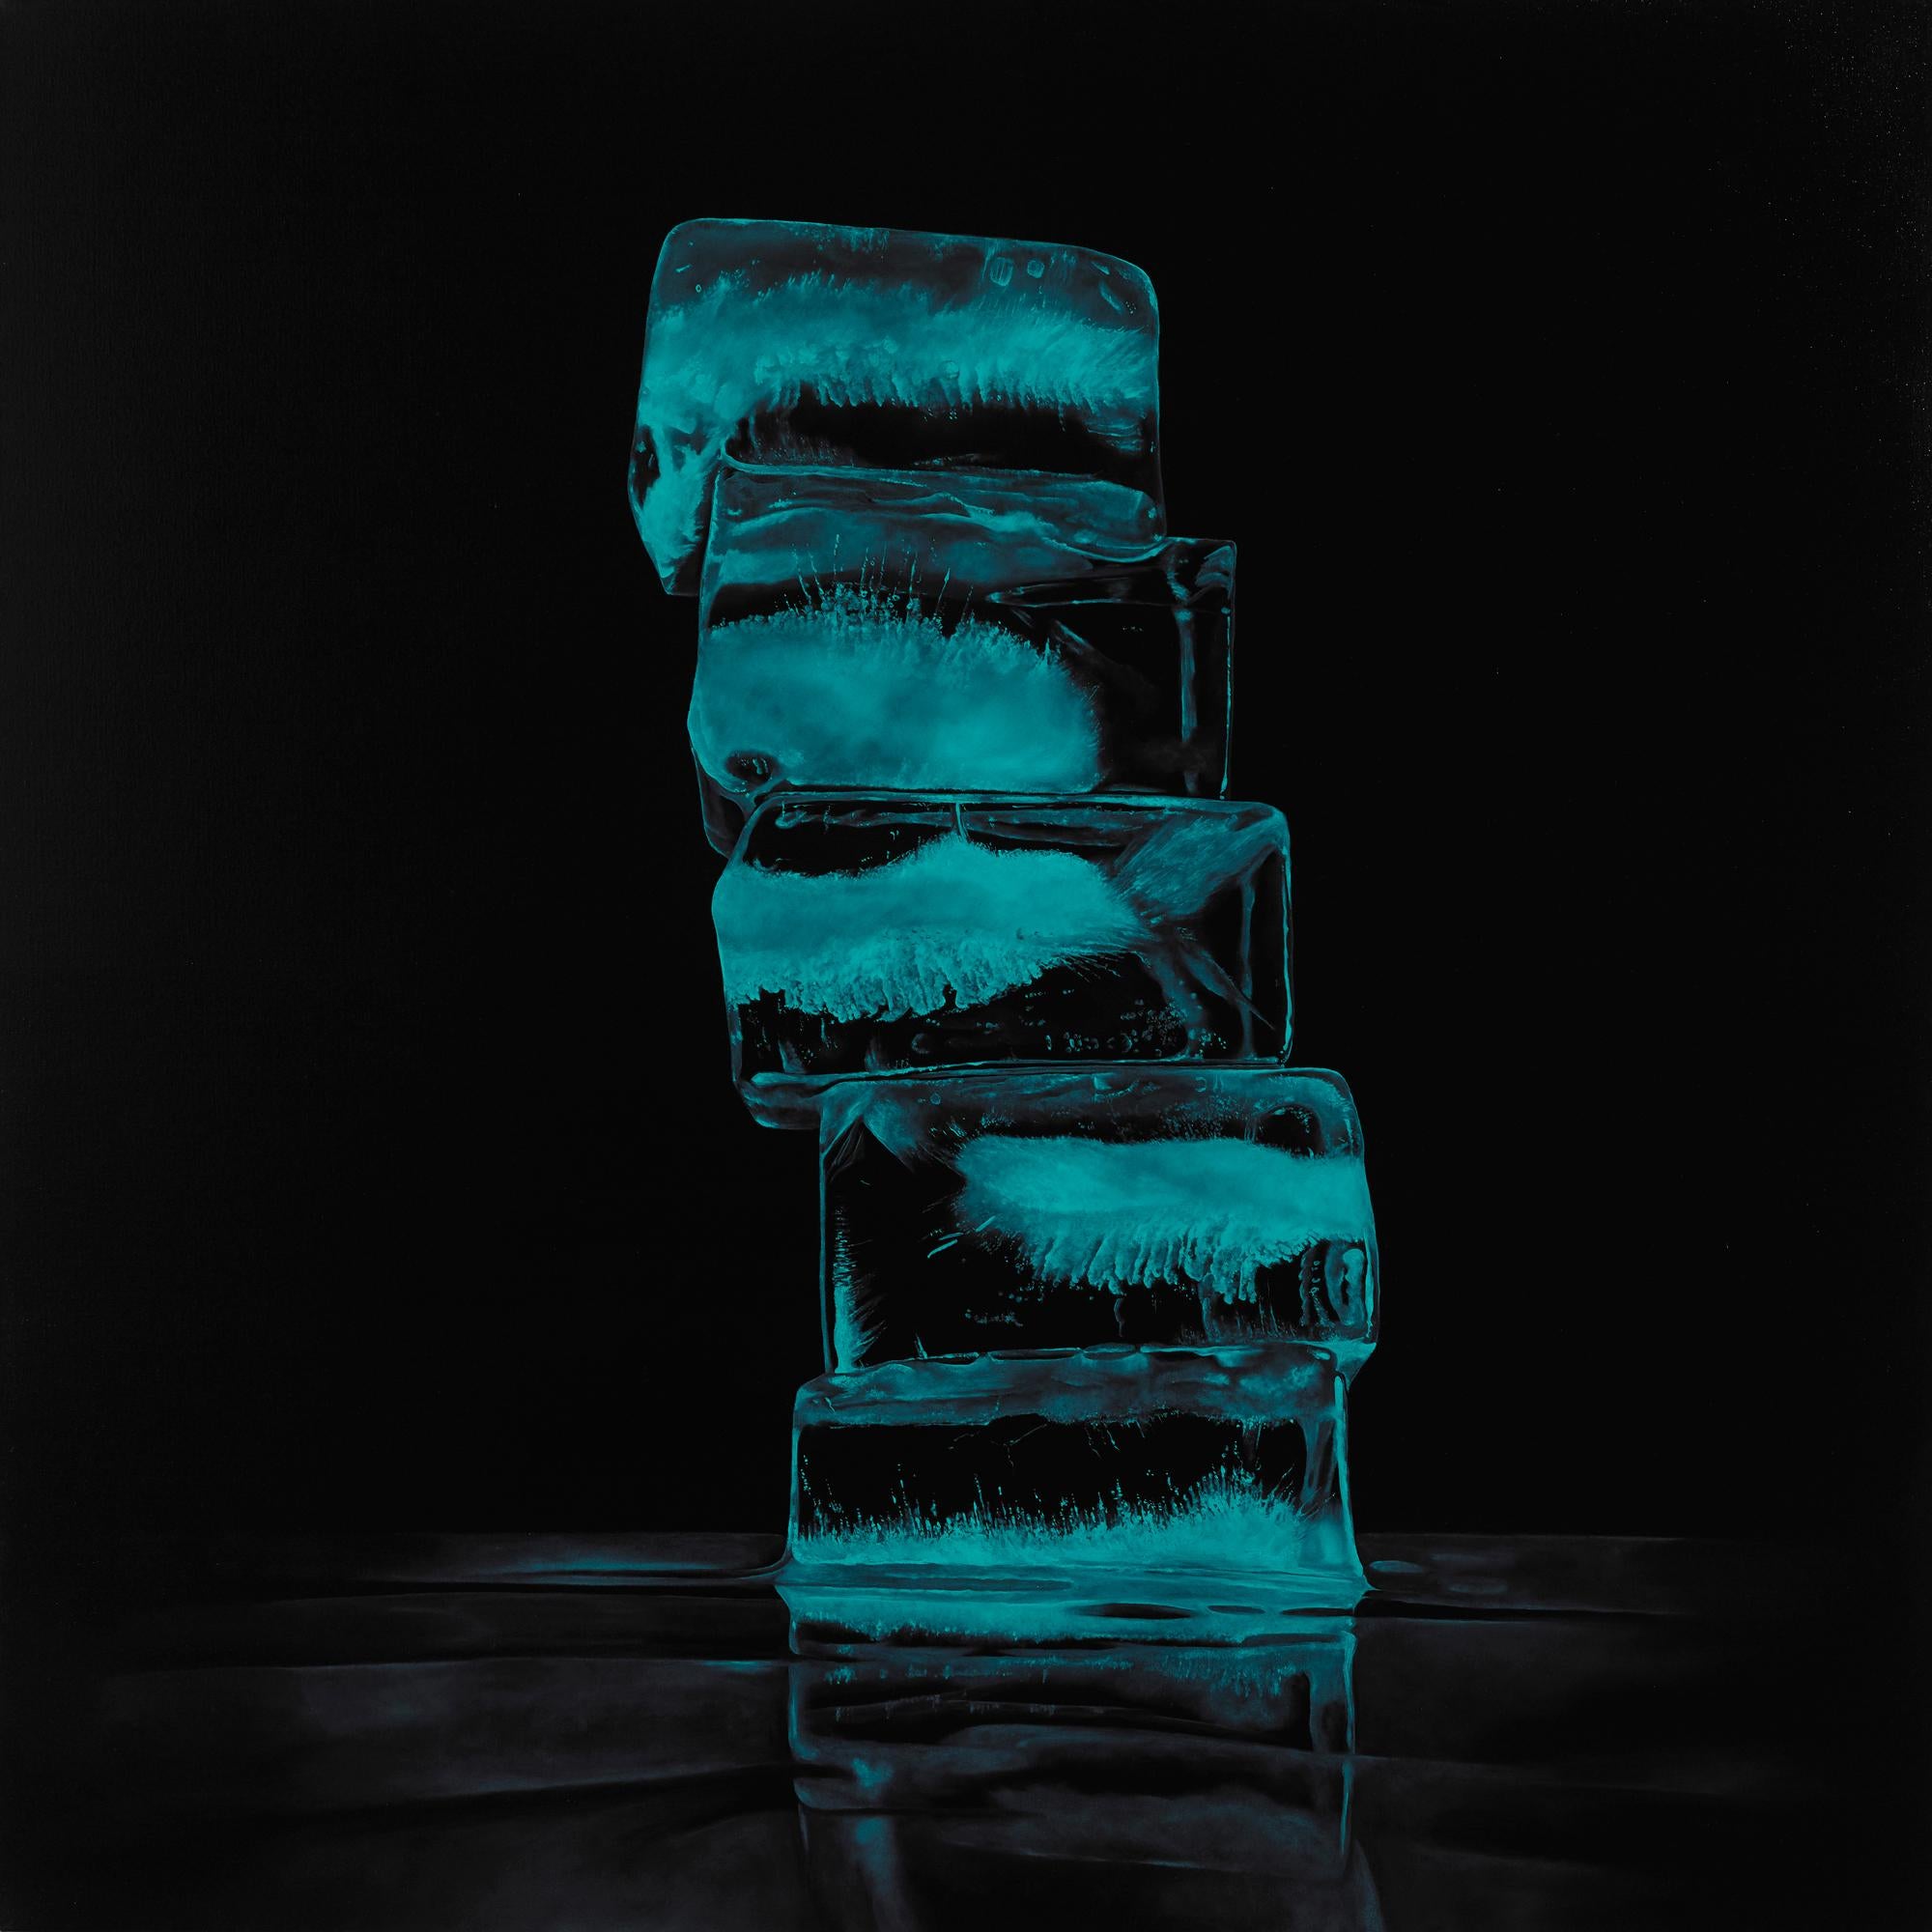 Kevin Palme Still-Life Painting - HOW FRAGILE WE ARE, SOMEPLACE ELSE, ice cubes, illuminated, neon blue, realism